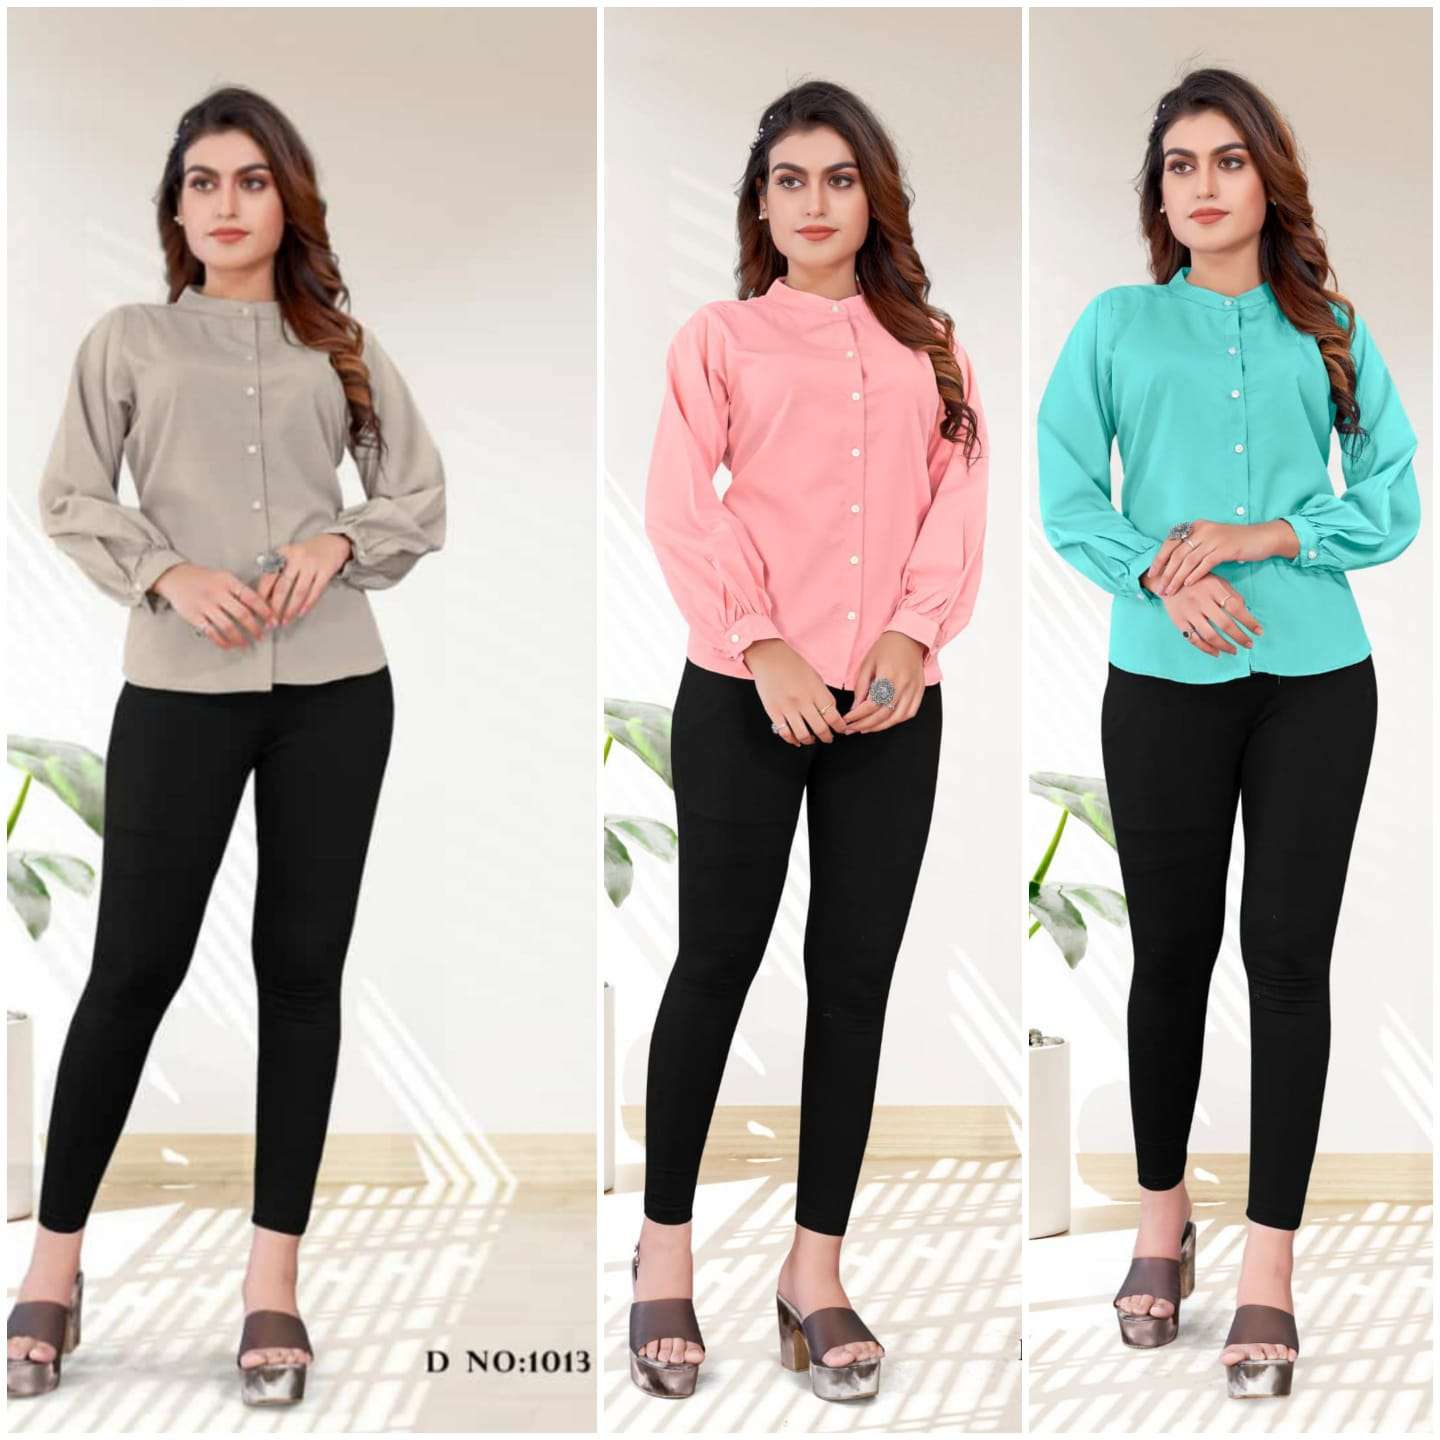 John-1013 By FF 01 To 03 Series Beautiful Stylish Fancy Colorful Casual Wear & Ethnic Wear Imported Tops At Wholesale Price